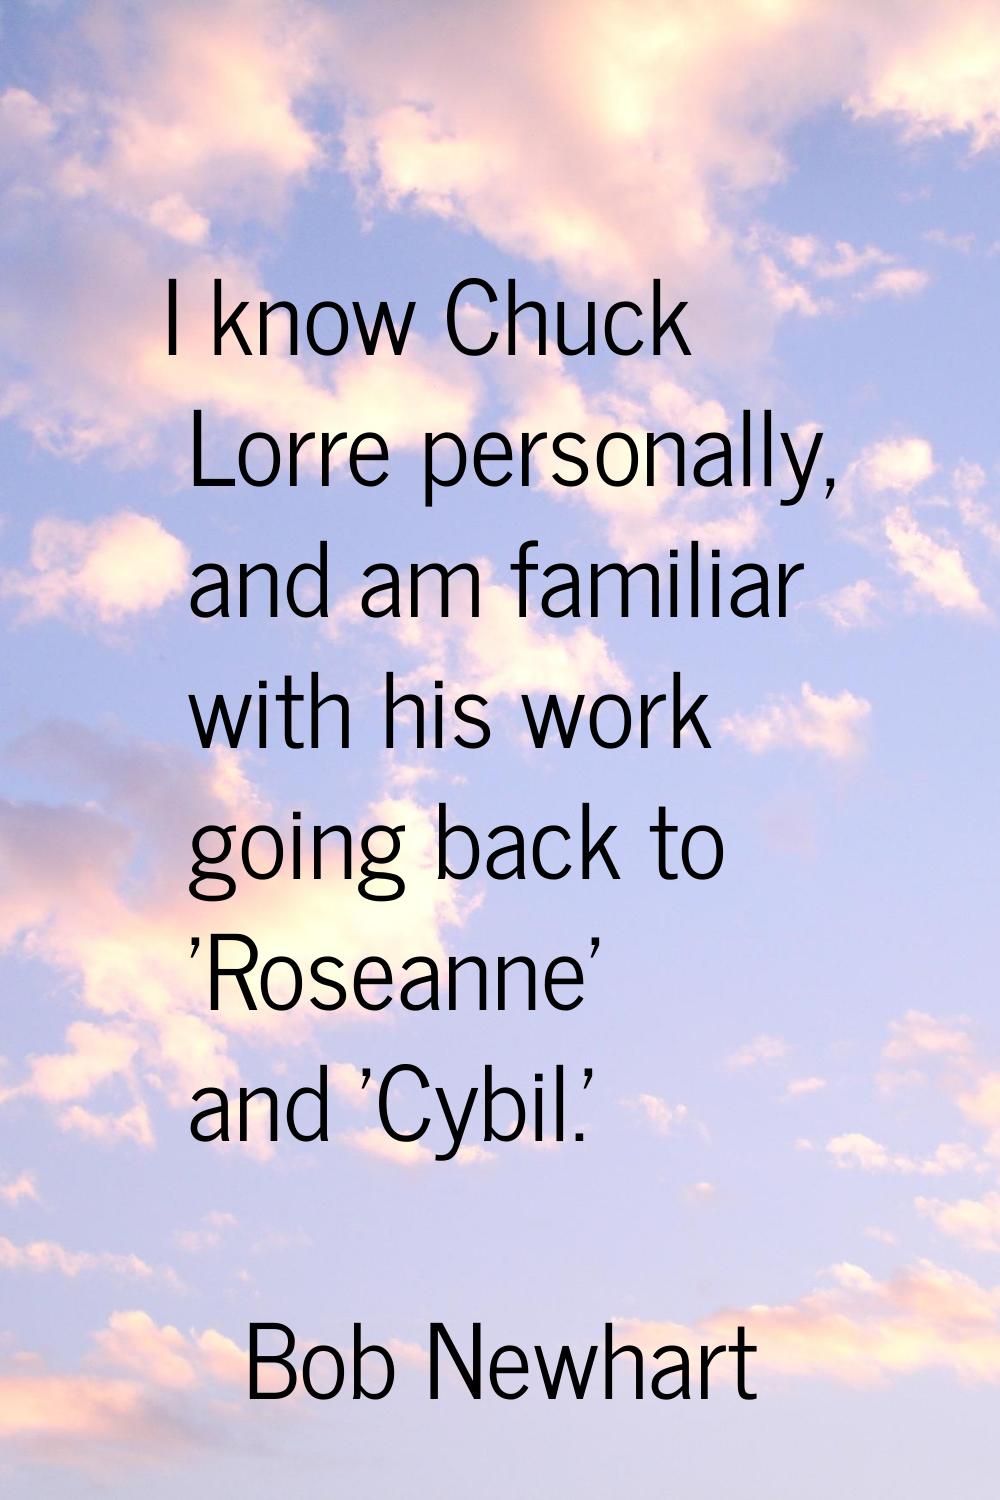 I know Chuck Lorre personally, and am familiar with his work going back to 'Roseanne' and 'Cybil.'